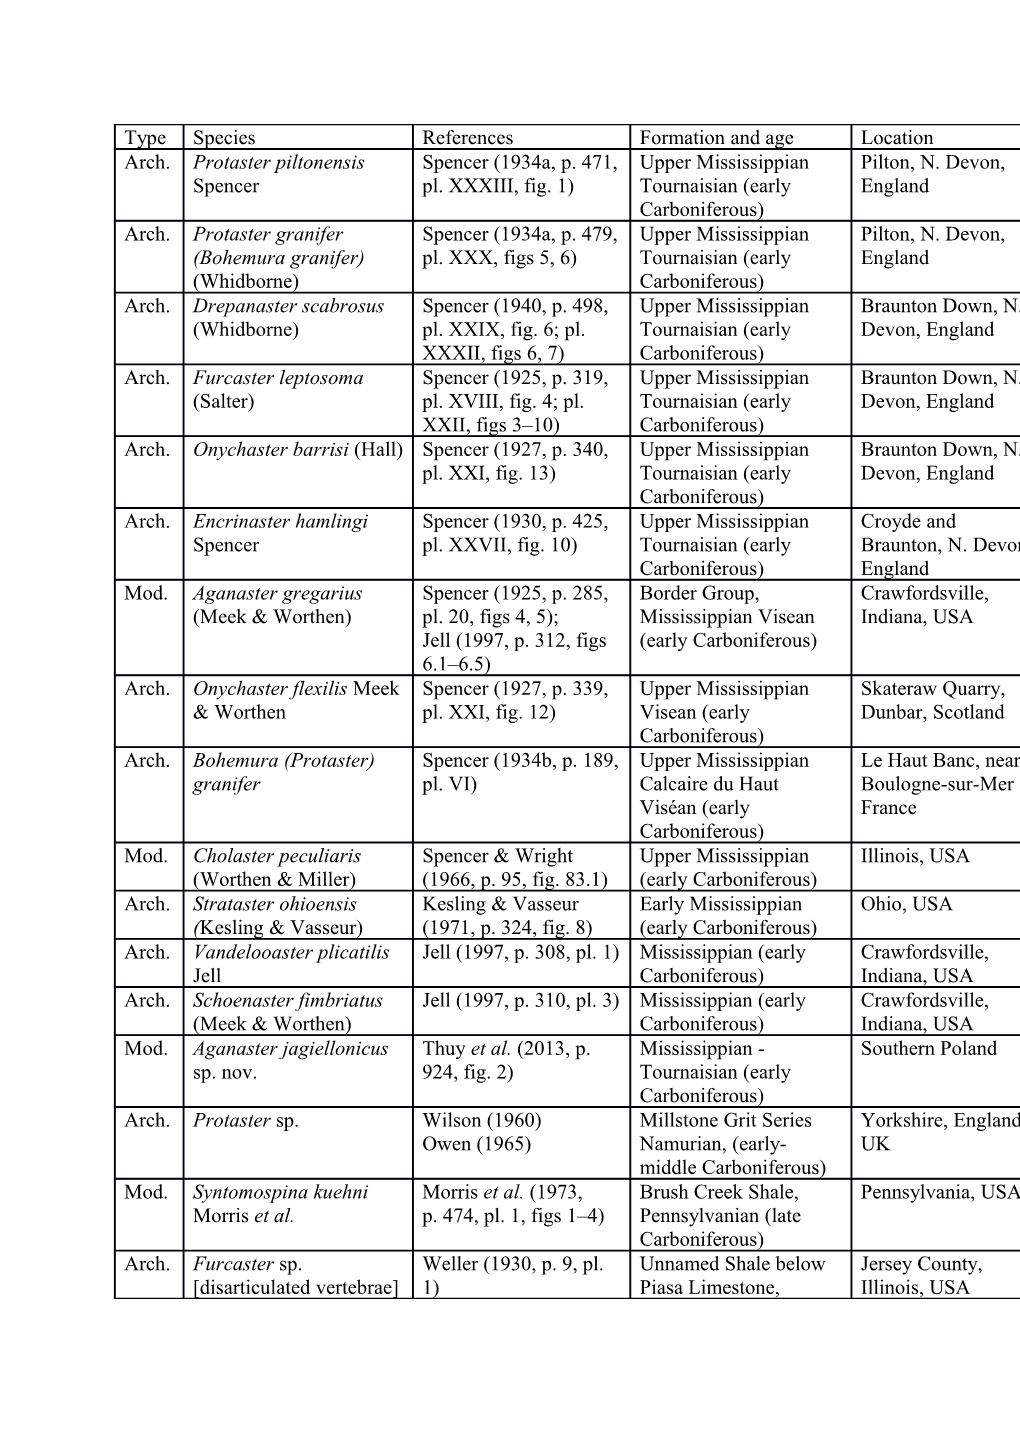 Supplemental Table 1. Table of All Known Published Carboniferous, Permian and Triassic